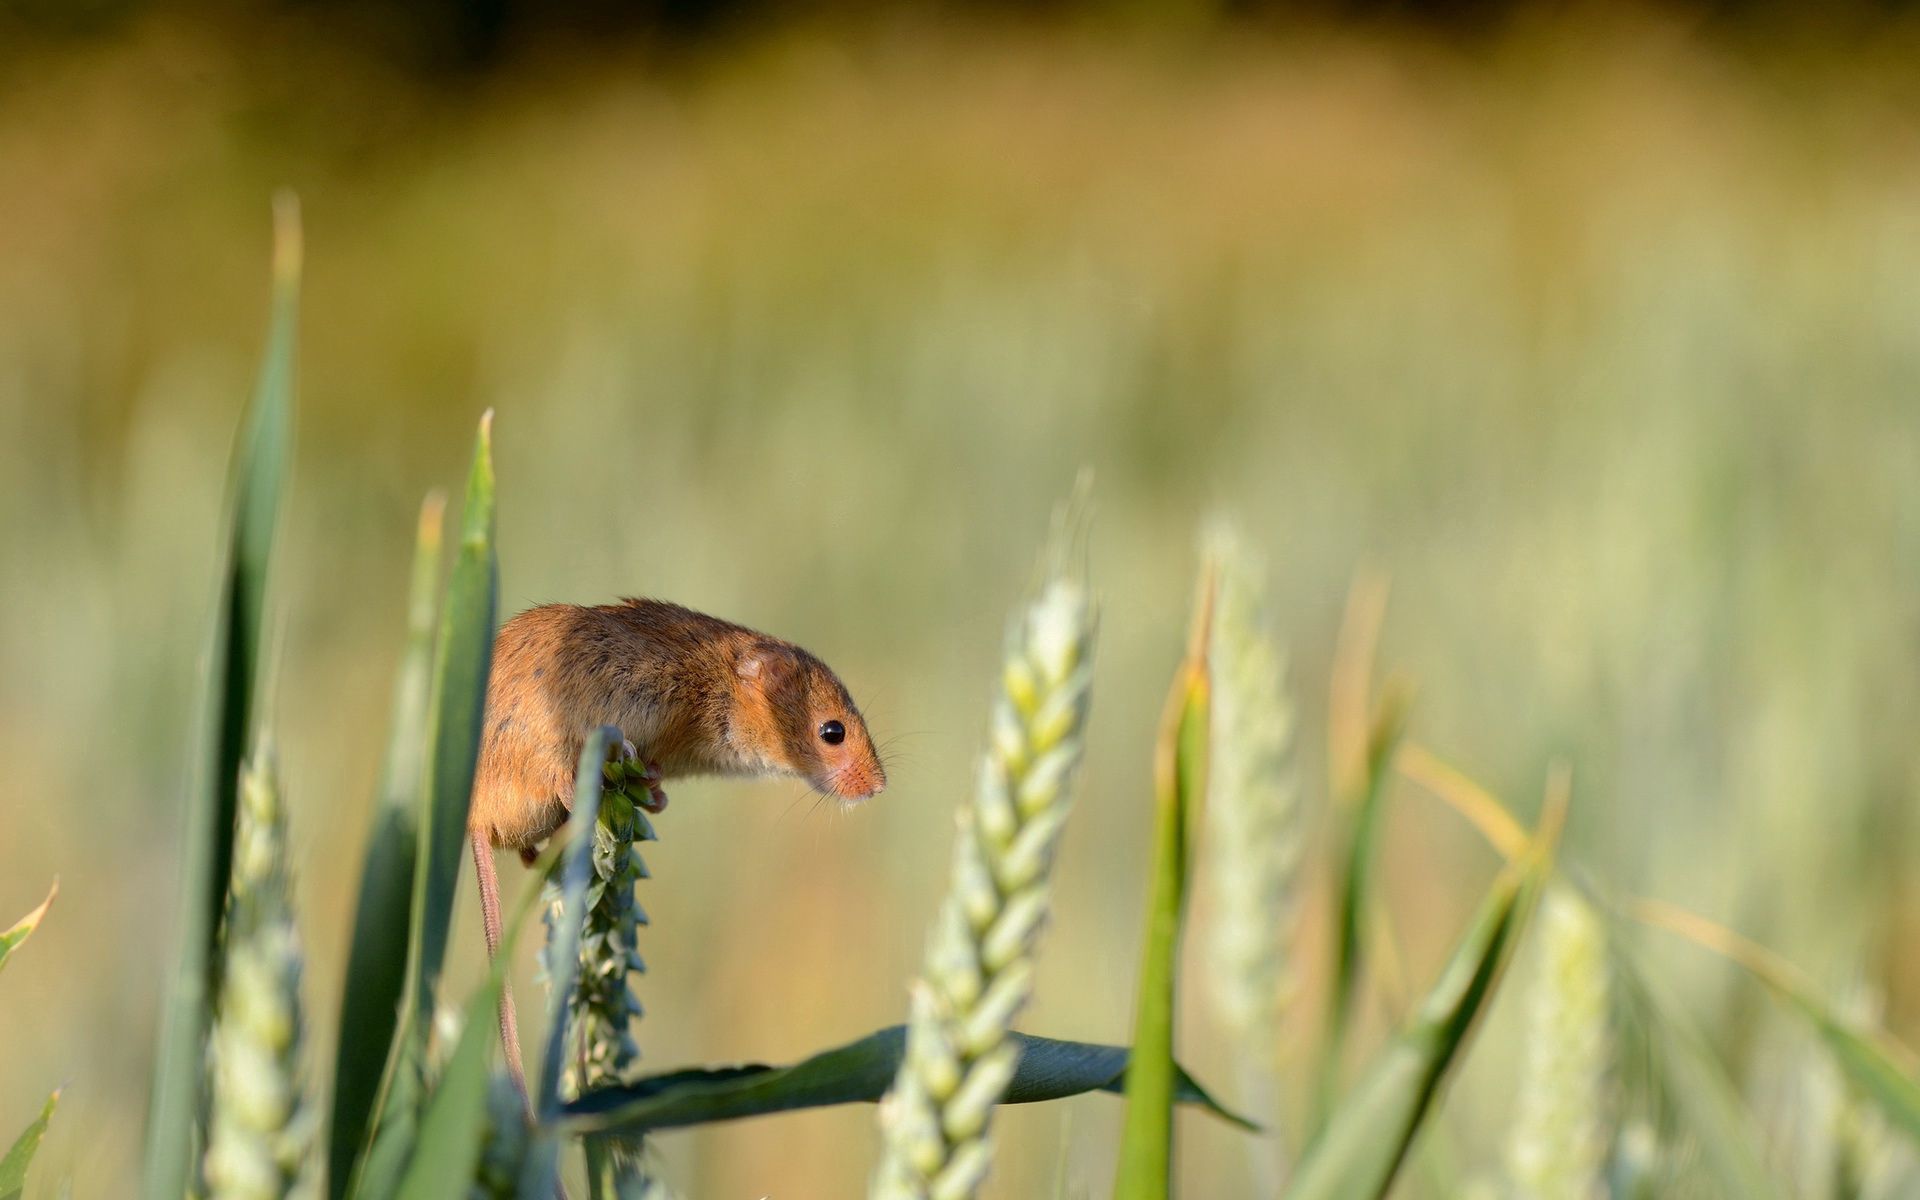 animals, grass, rodent, ear, field mouse, harvest mouse